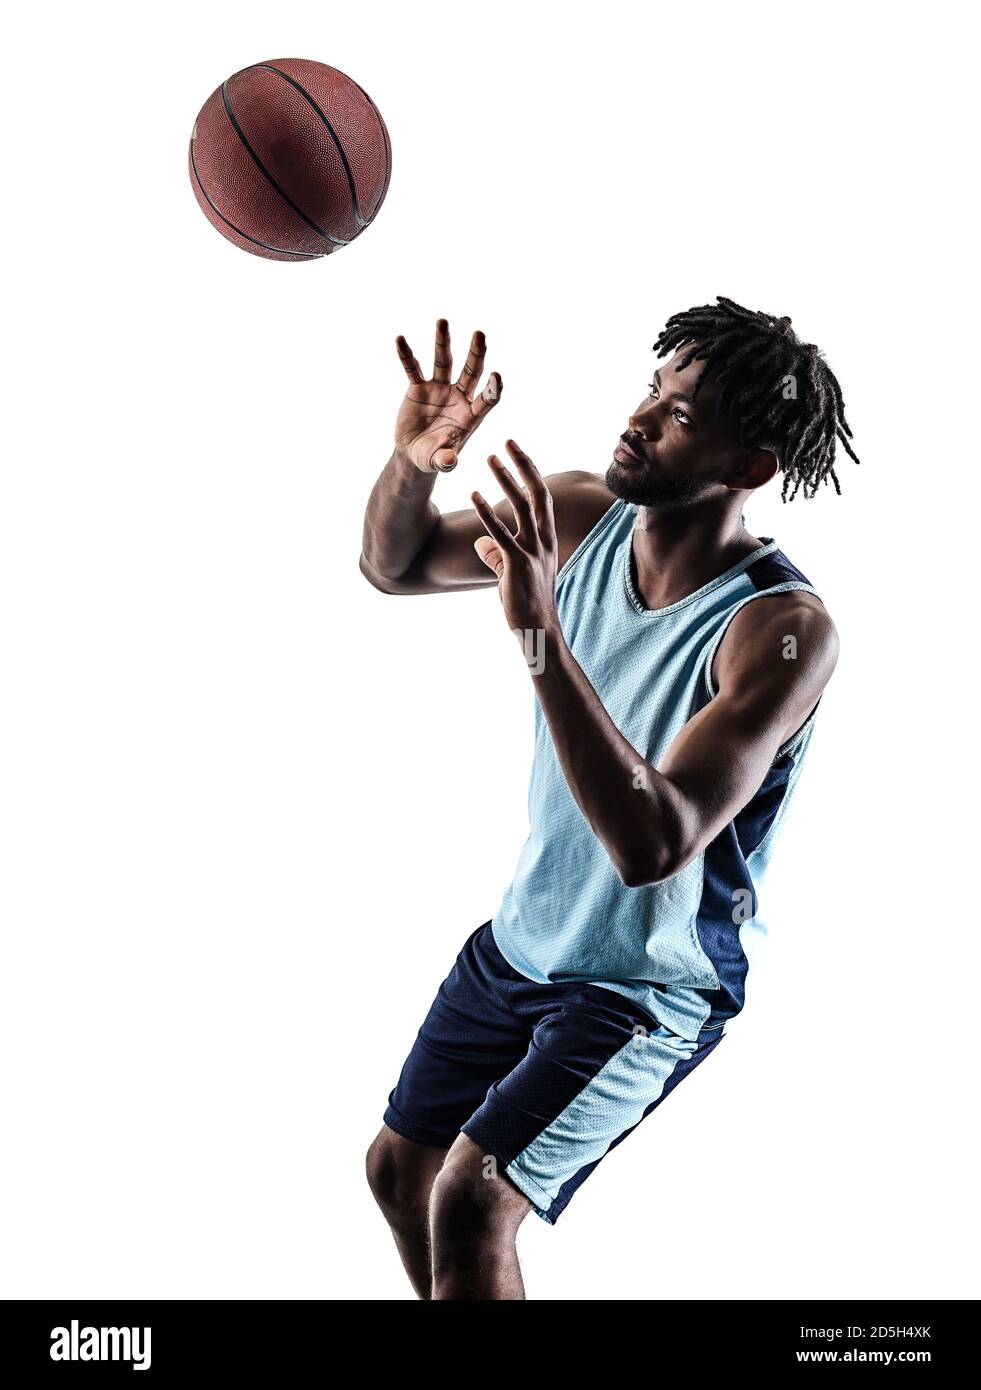 one afro-american african basketball player man isolated in silhouette shadow on white background Stock Photo